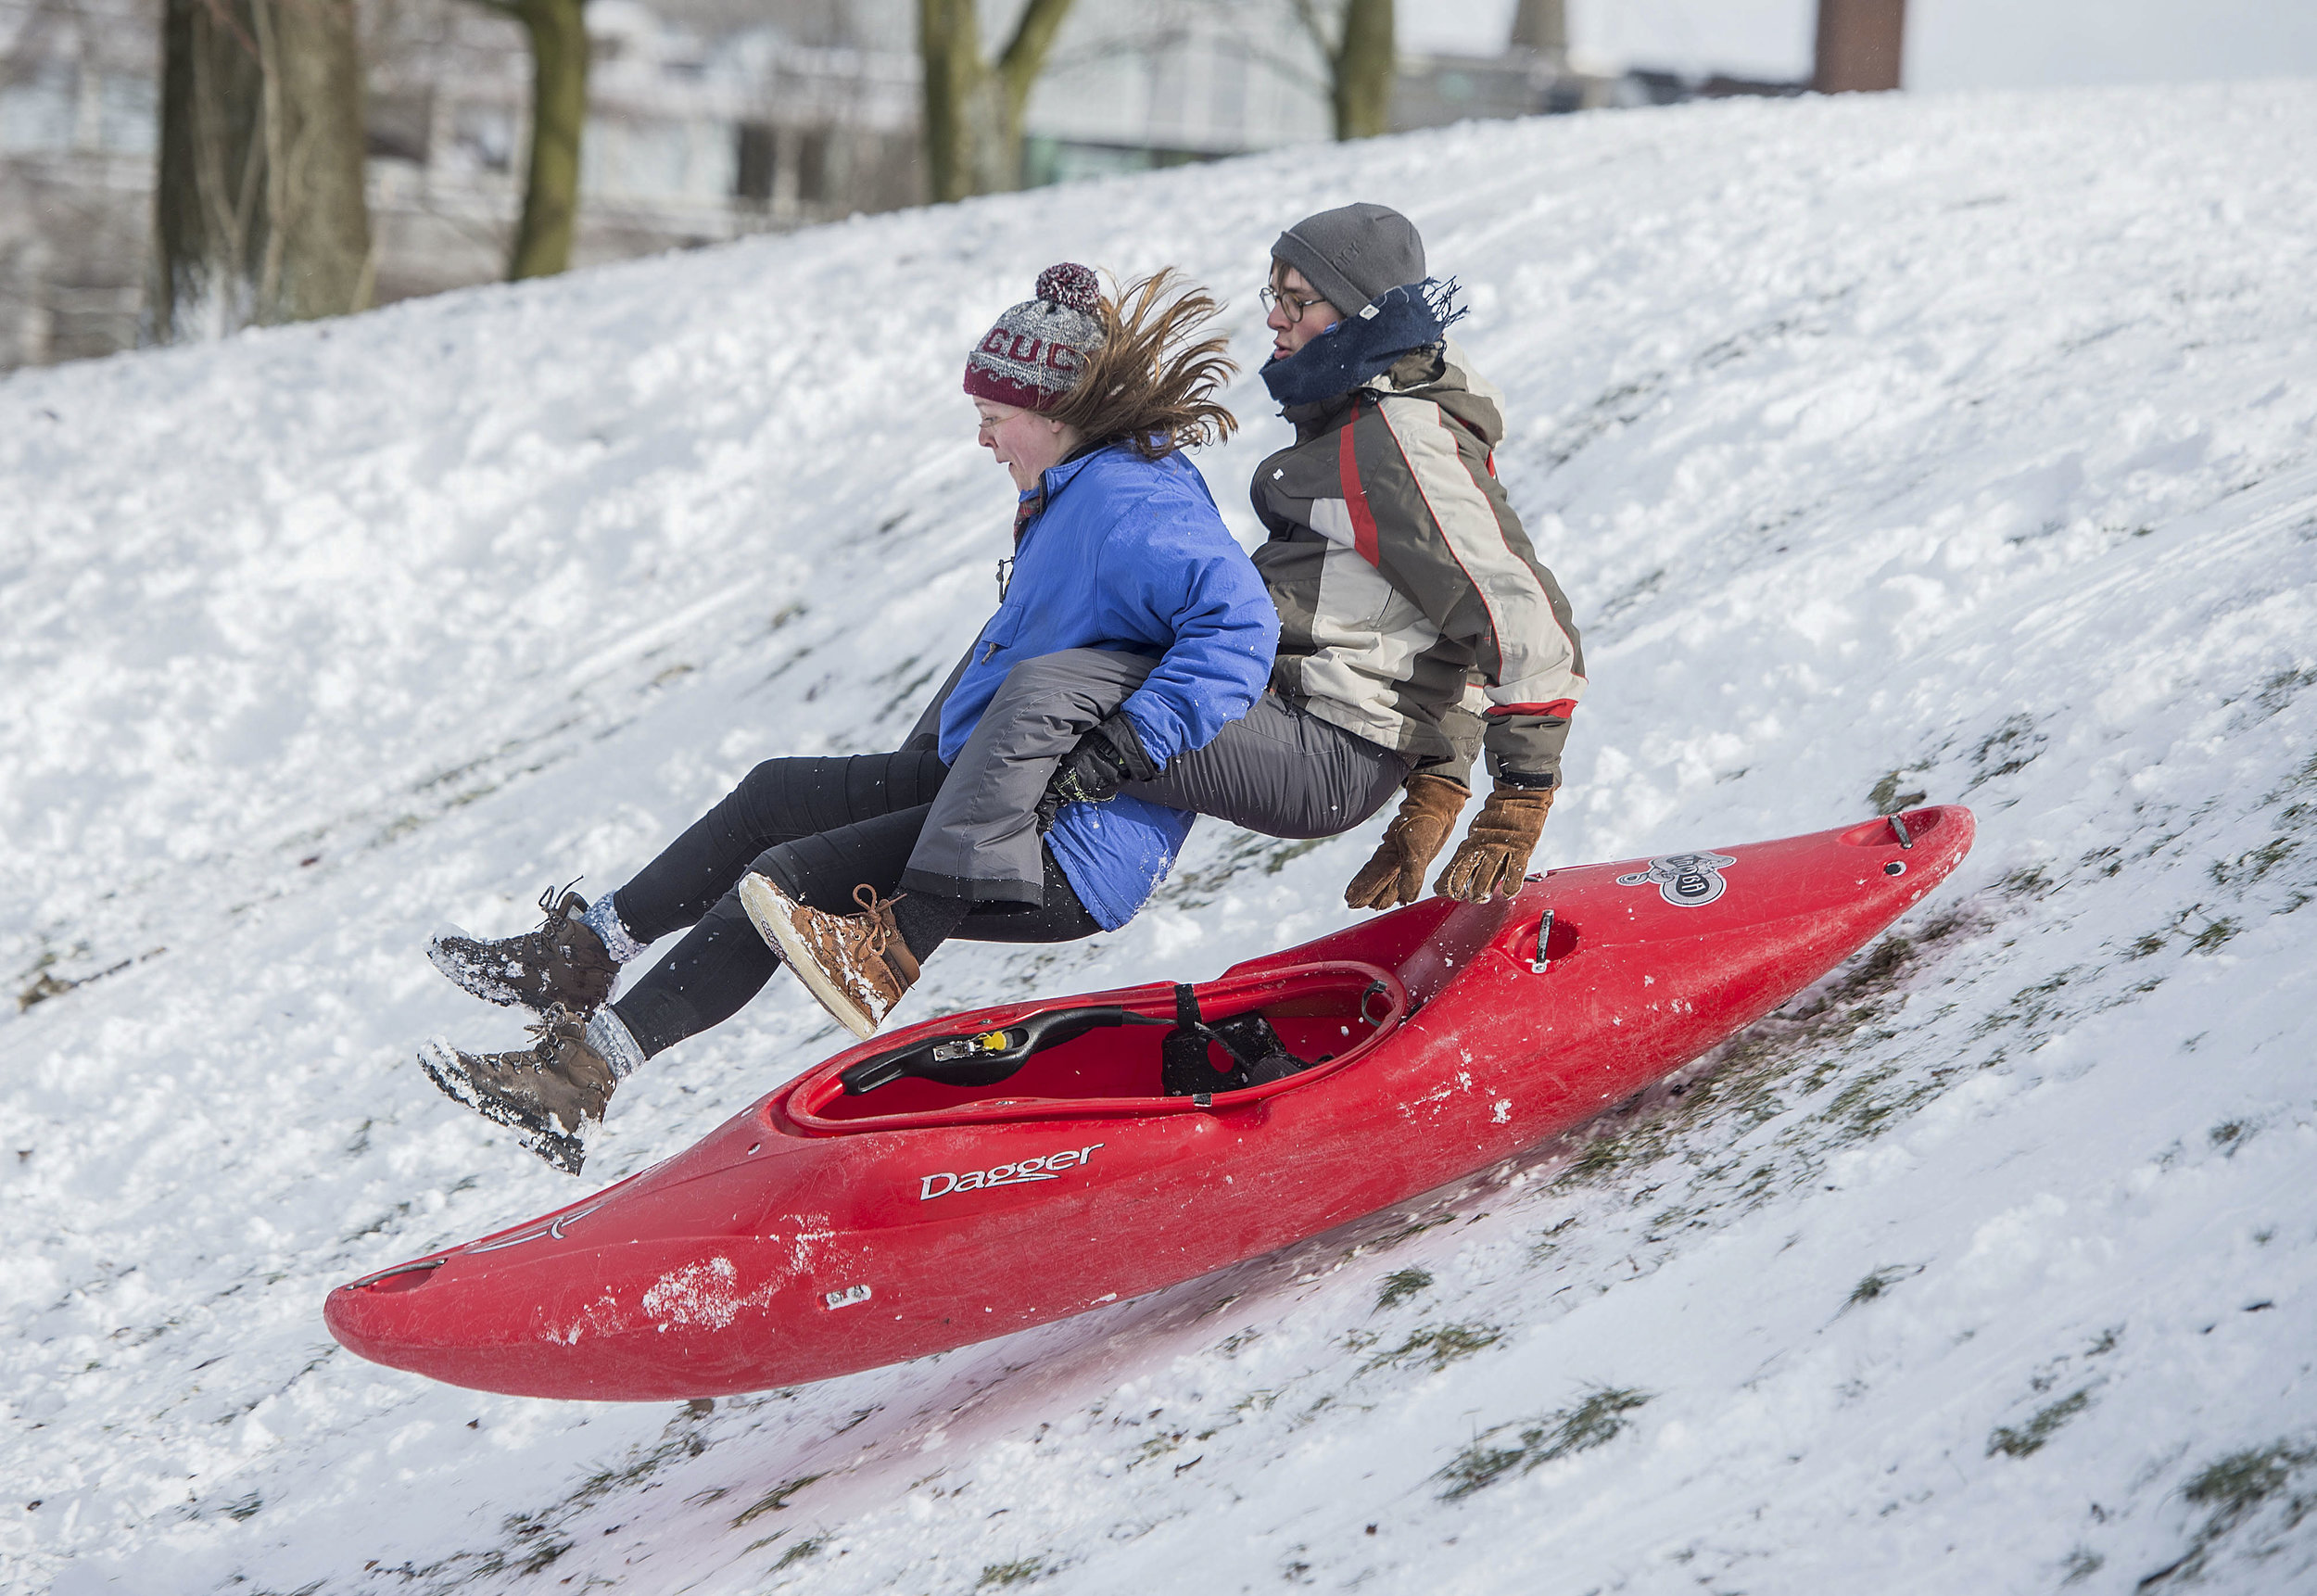  Members from the Glasgow University Canoe Club try an alternative way to get down a snowy hill in Kelvingrove Park, Glasgow during the snowstorm dubbed "The Beast from the East�.
Photo by Wattie Cheung, 28 February 2018
 